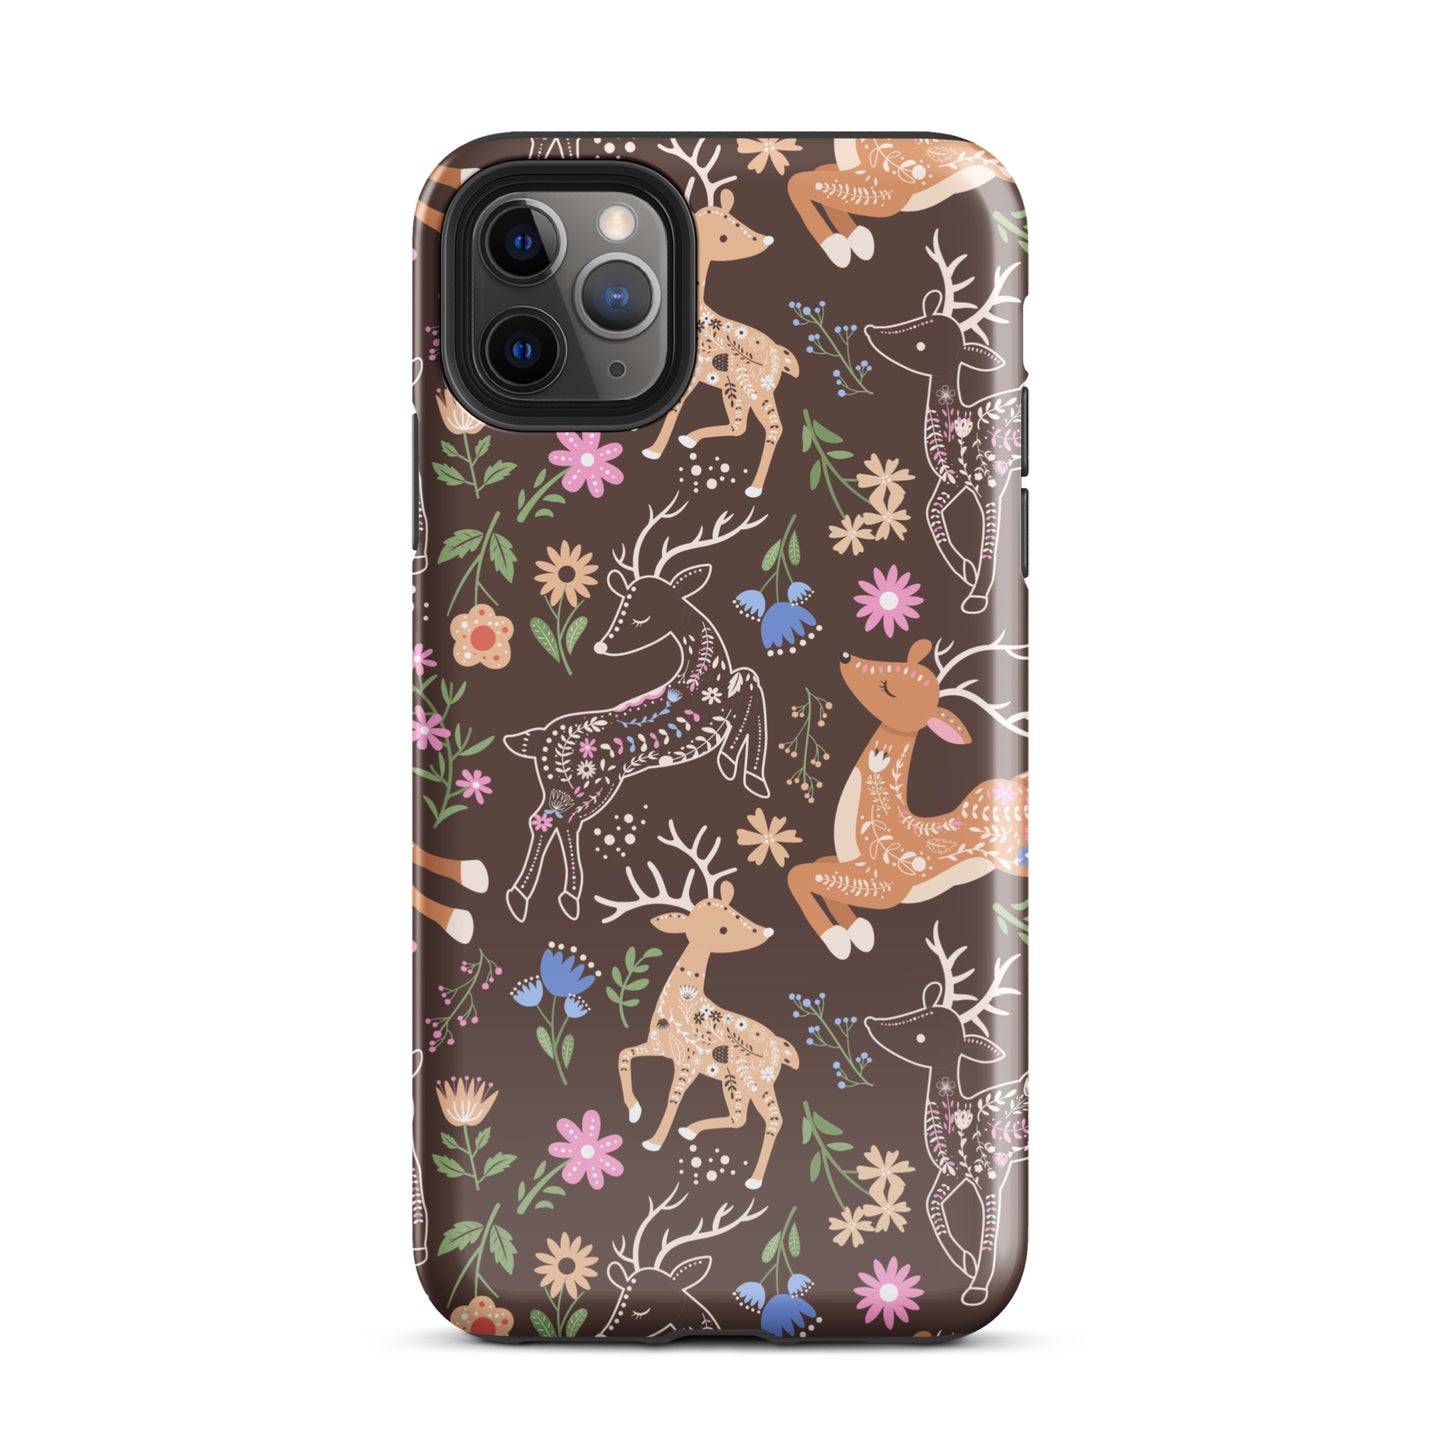 Deer Meadow iPhone Case iPhone 11 Pro Max Glossy